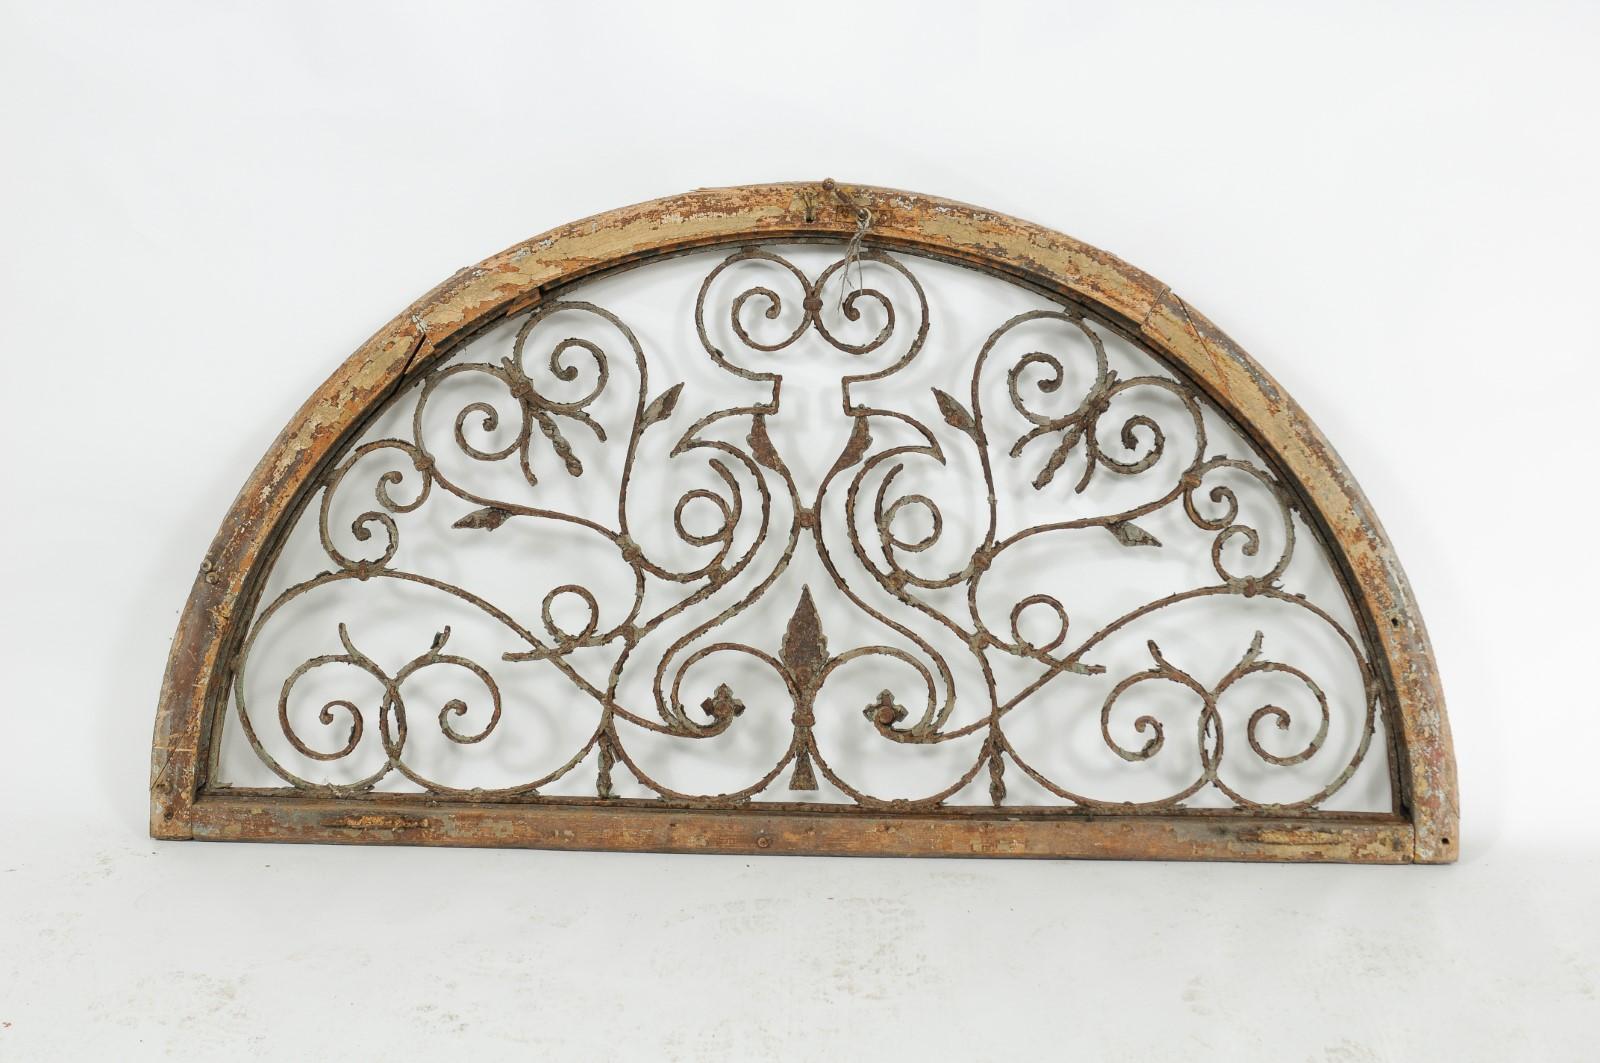 A continental wrought iron and pine decorative demilune architectural wall panel from the Turn of the Century with arabesques of scrolls, volutes and weathered patina. Born in the very early years of the 20th century, this interesting architectural